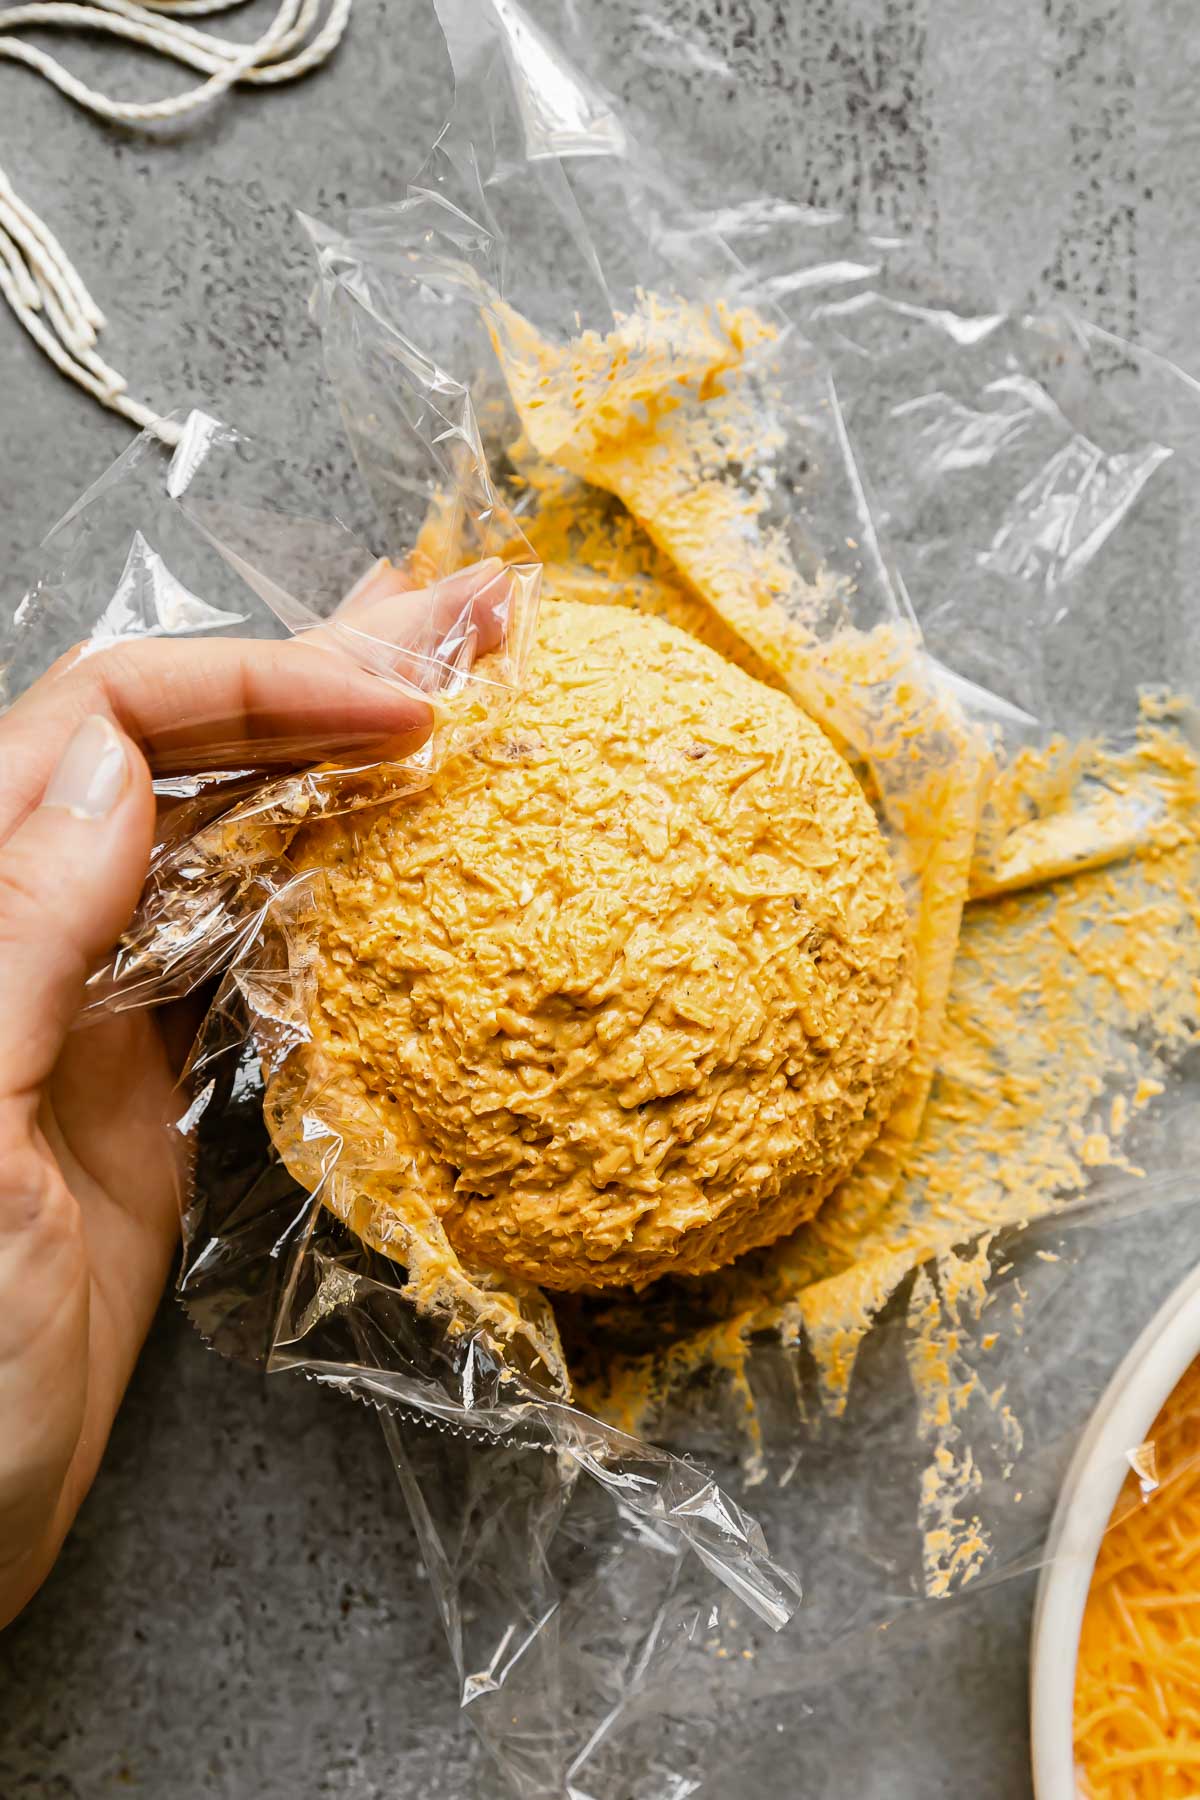 Plastic wrap covers thanksgiving cheese ball mixture that sits atop a gray textured surface. A woman's hands word to shape the cheese ball into a ball shape using the plastic wrap to keep clean. Cut kitchen twine and s small ceramic bowl filled with shredded cheddar cheese surround the formed cheese ball at center.